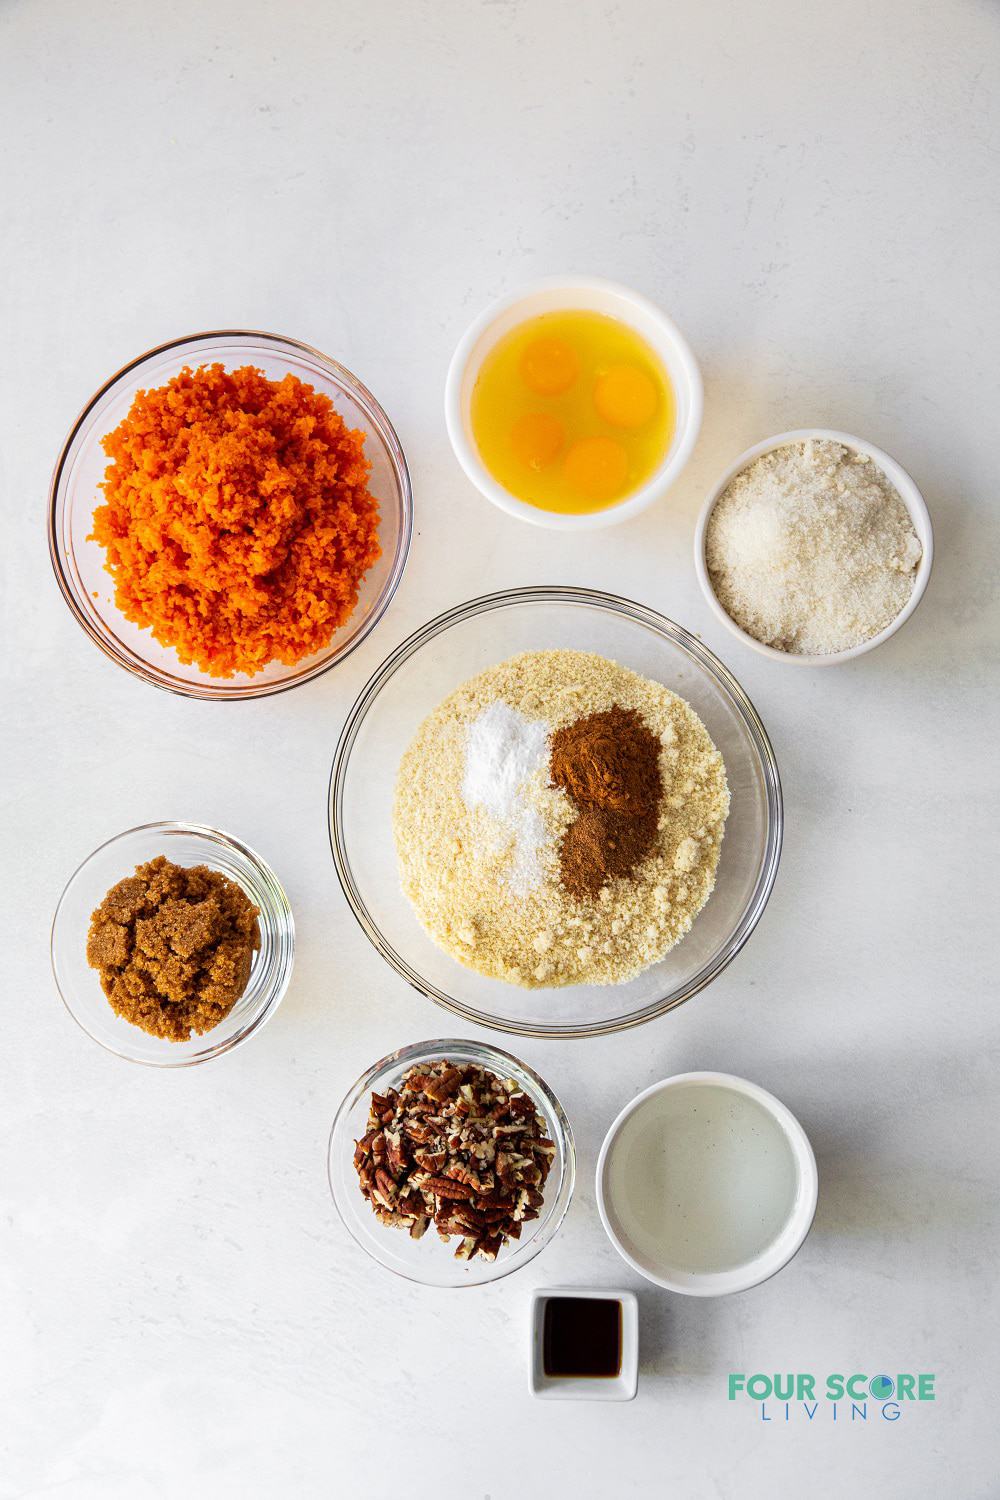 The ingredients needed to make a keto carrot cake, measured into separate small bowls.